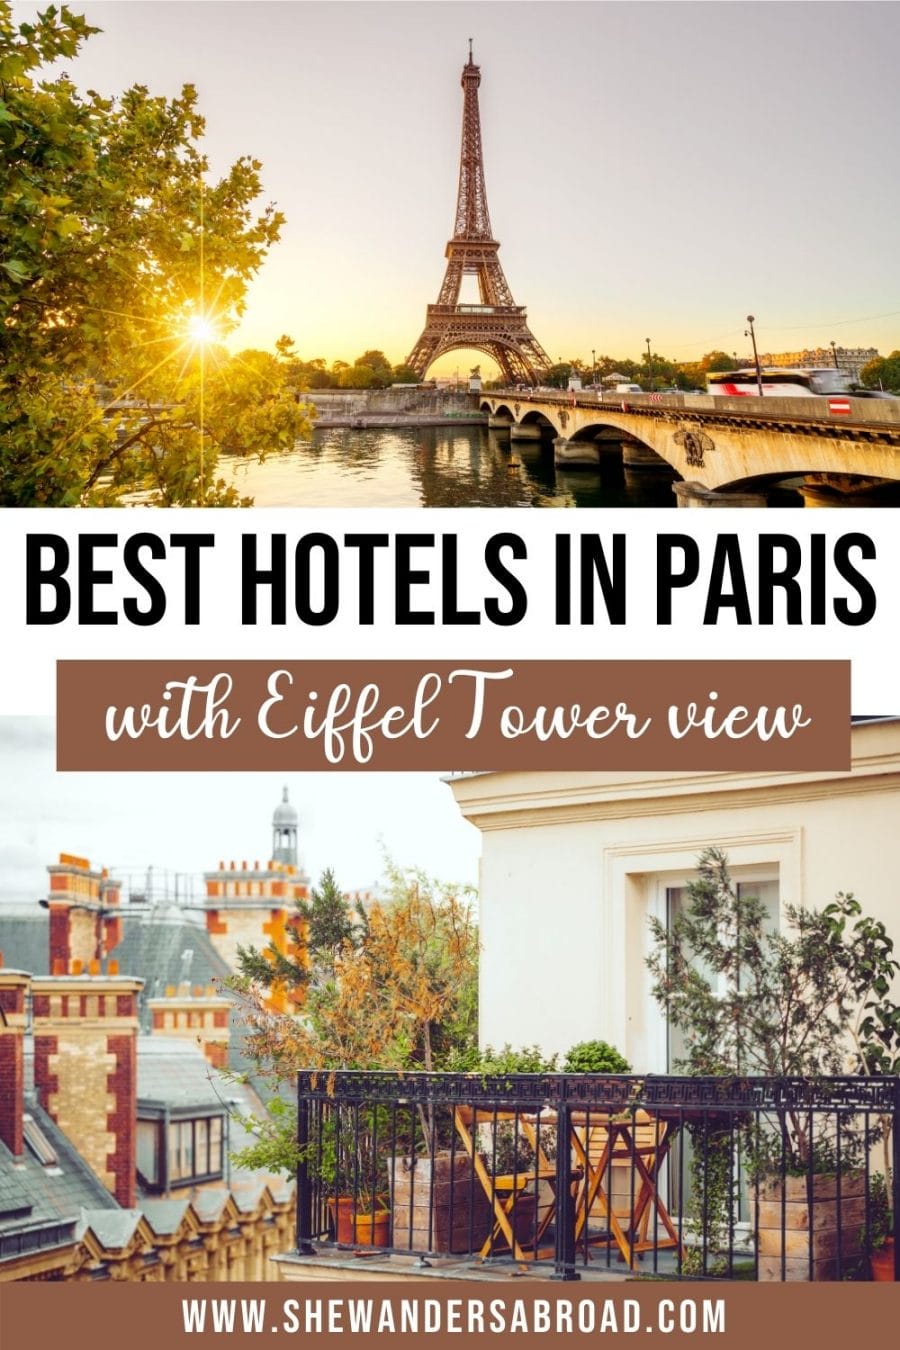 Top 15 Best Hotels in Paris with Eiffel Tower View